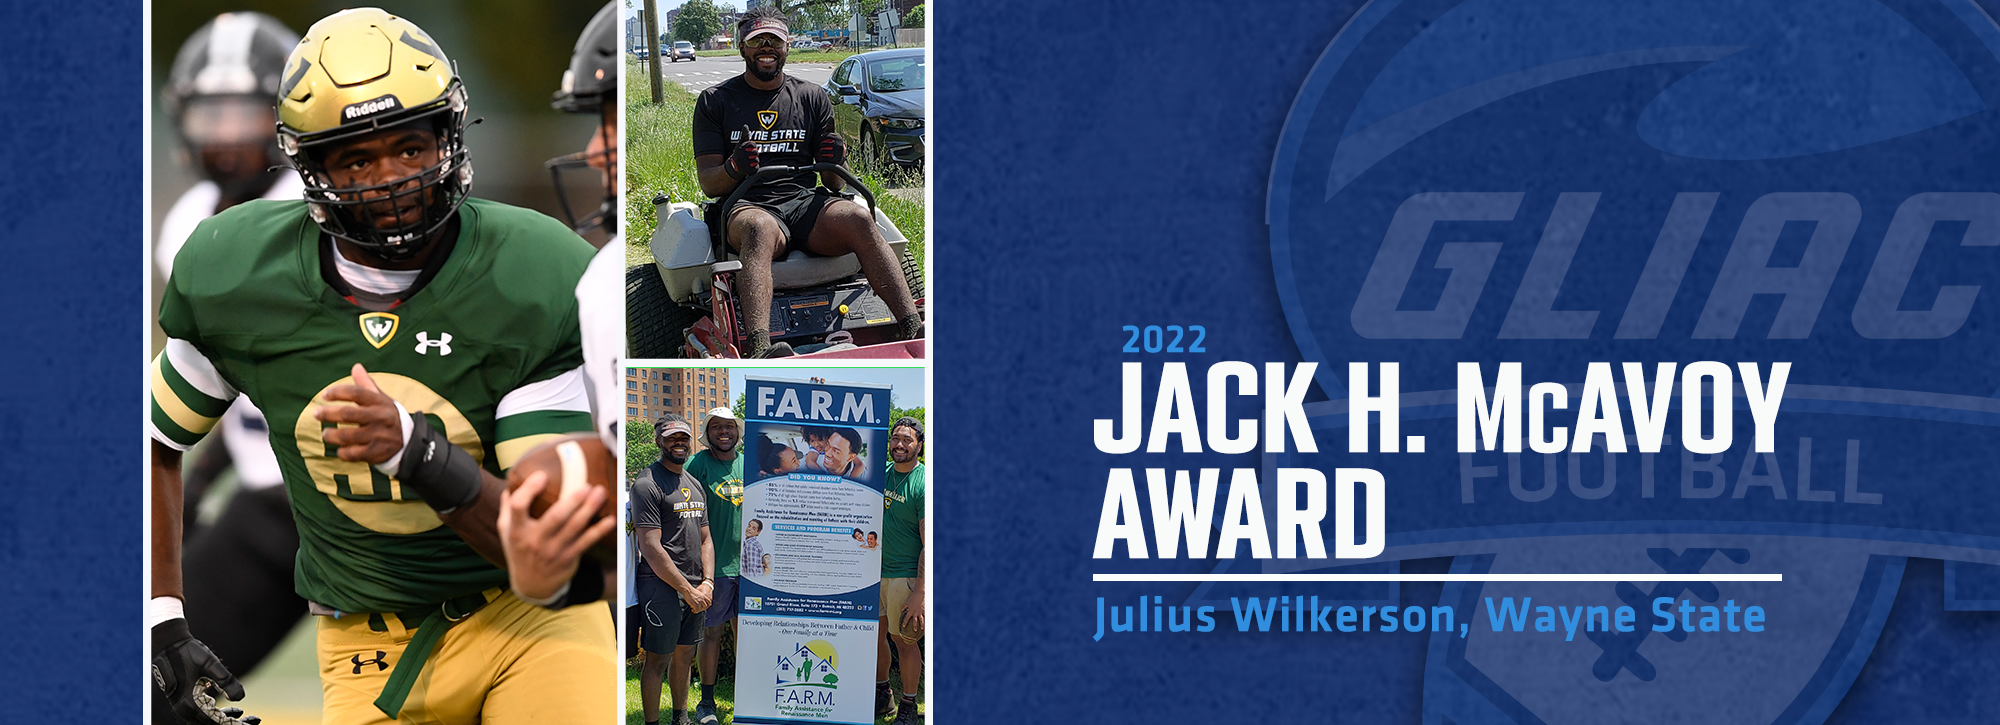 Wayne State's Julius Wilkerson honored with 2022 Jack H. McAvoy Award